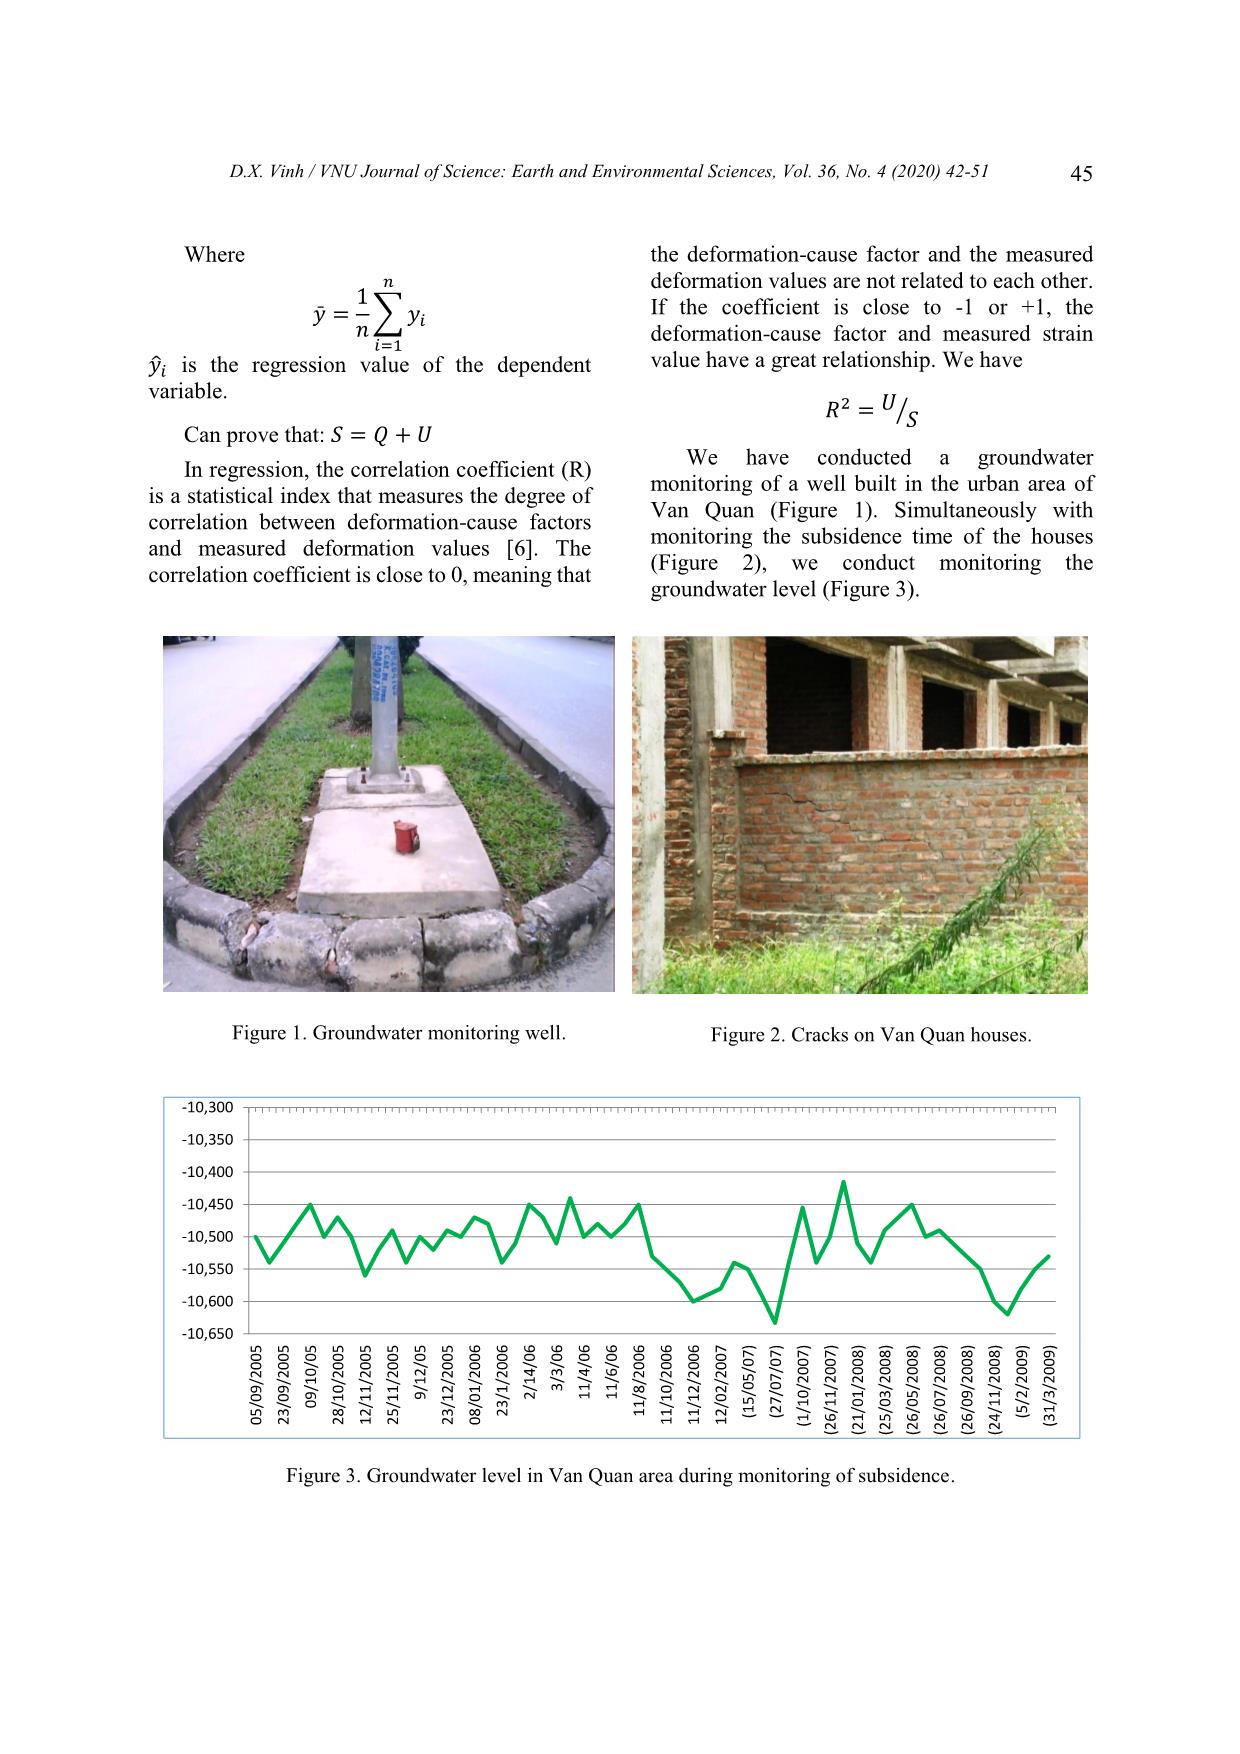 On the Influence of the Soil and Groundwater to the Subsidence of Houses in Van Quan, Hanoi trang 4